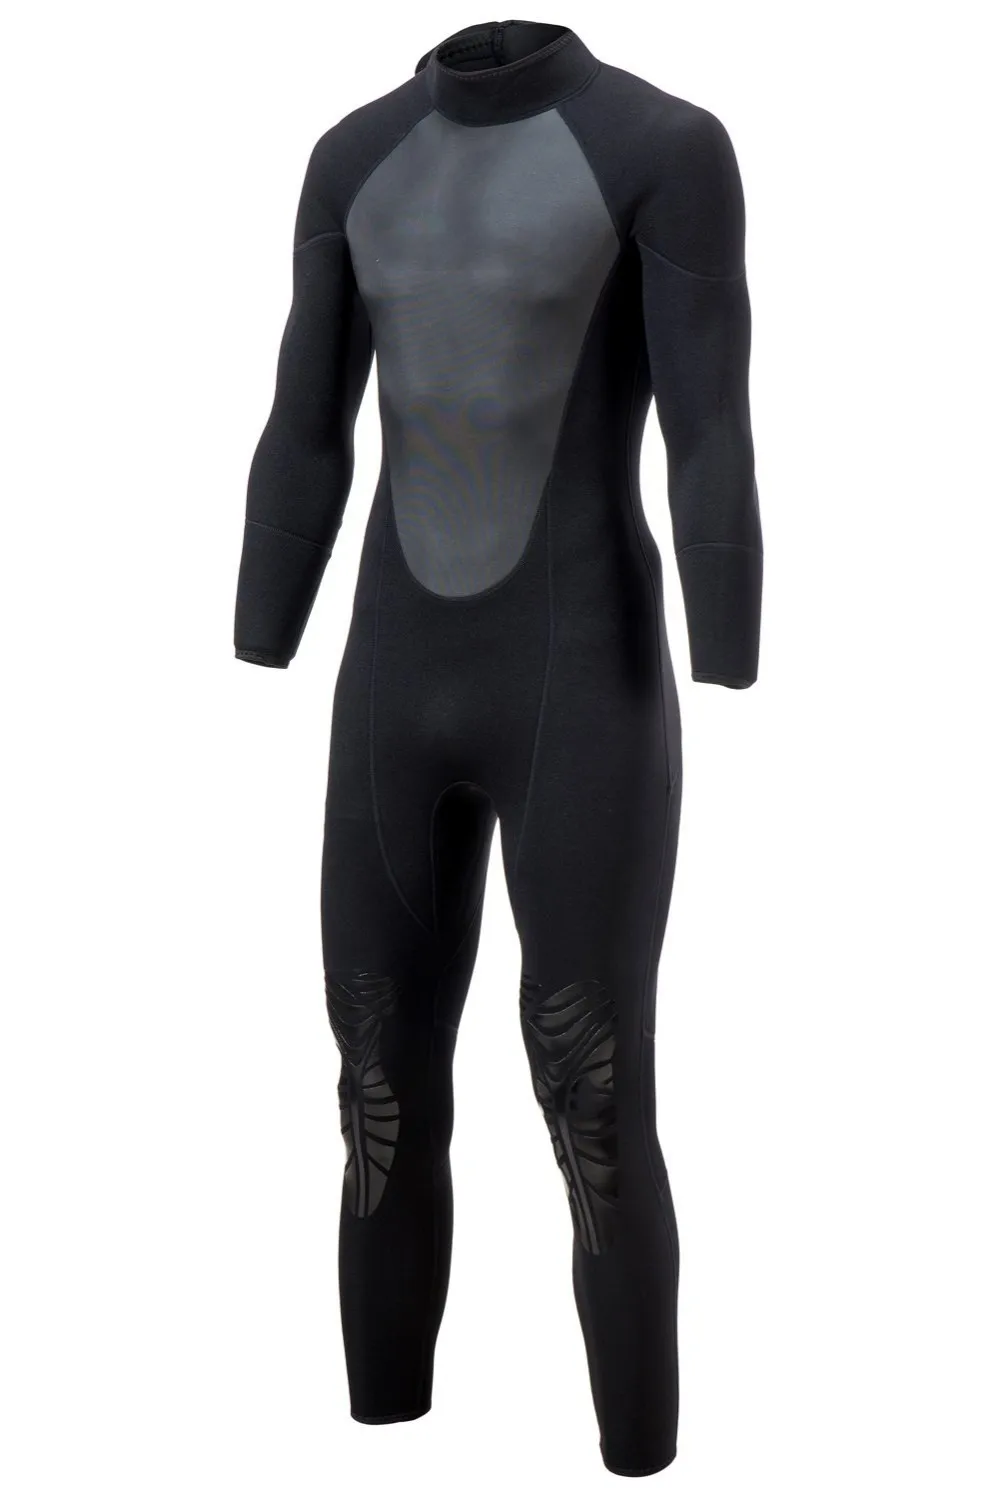 Economic High Quality Sheico Wetsuit Surfing,Mens Long Shiny Wetsuit ...